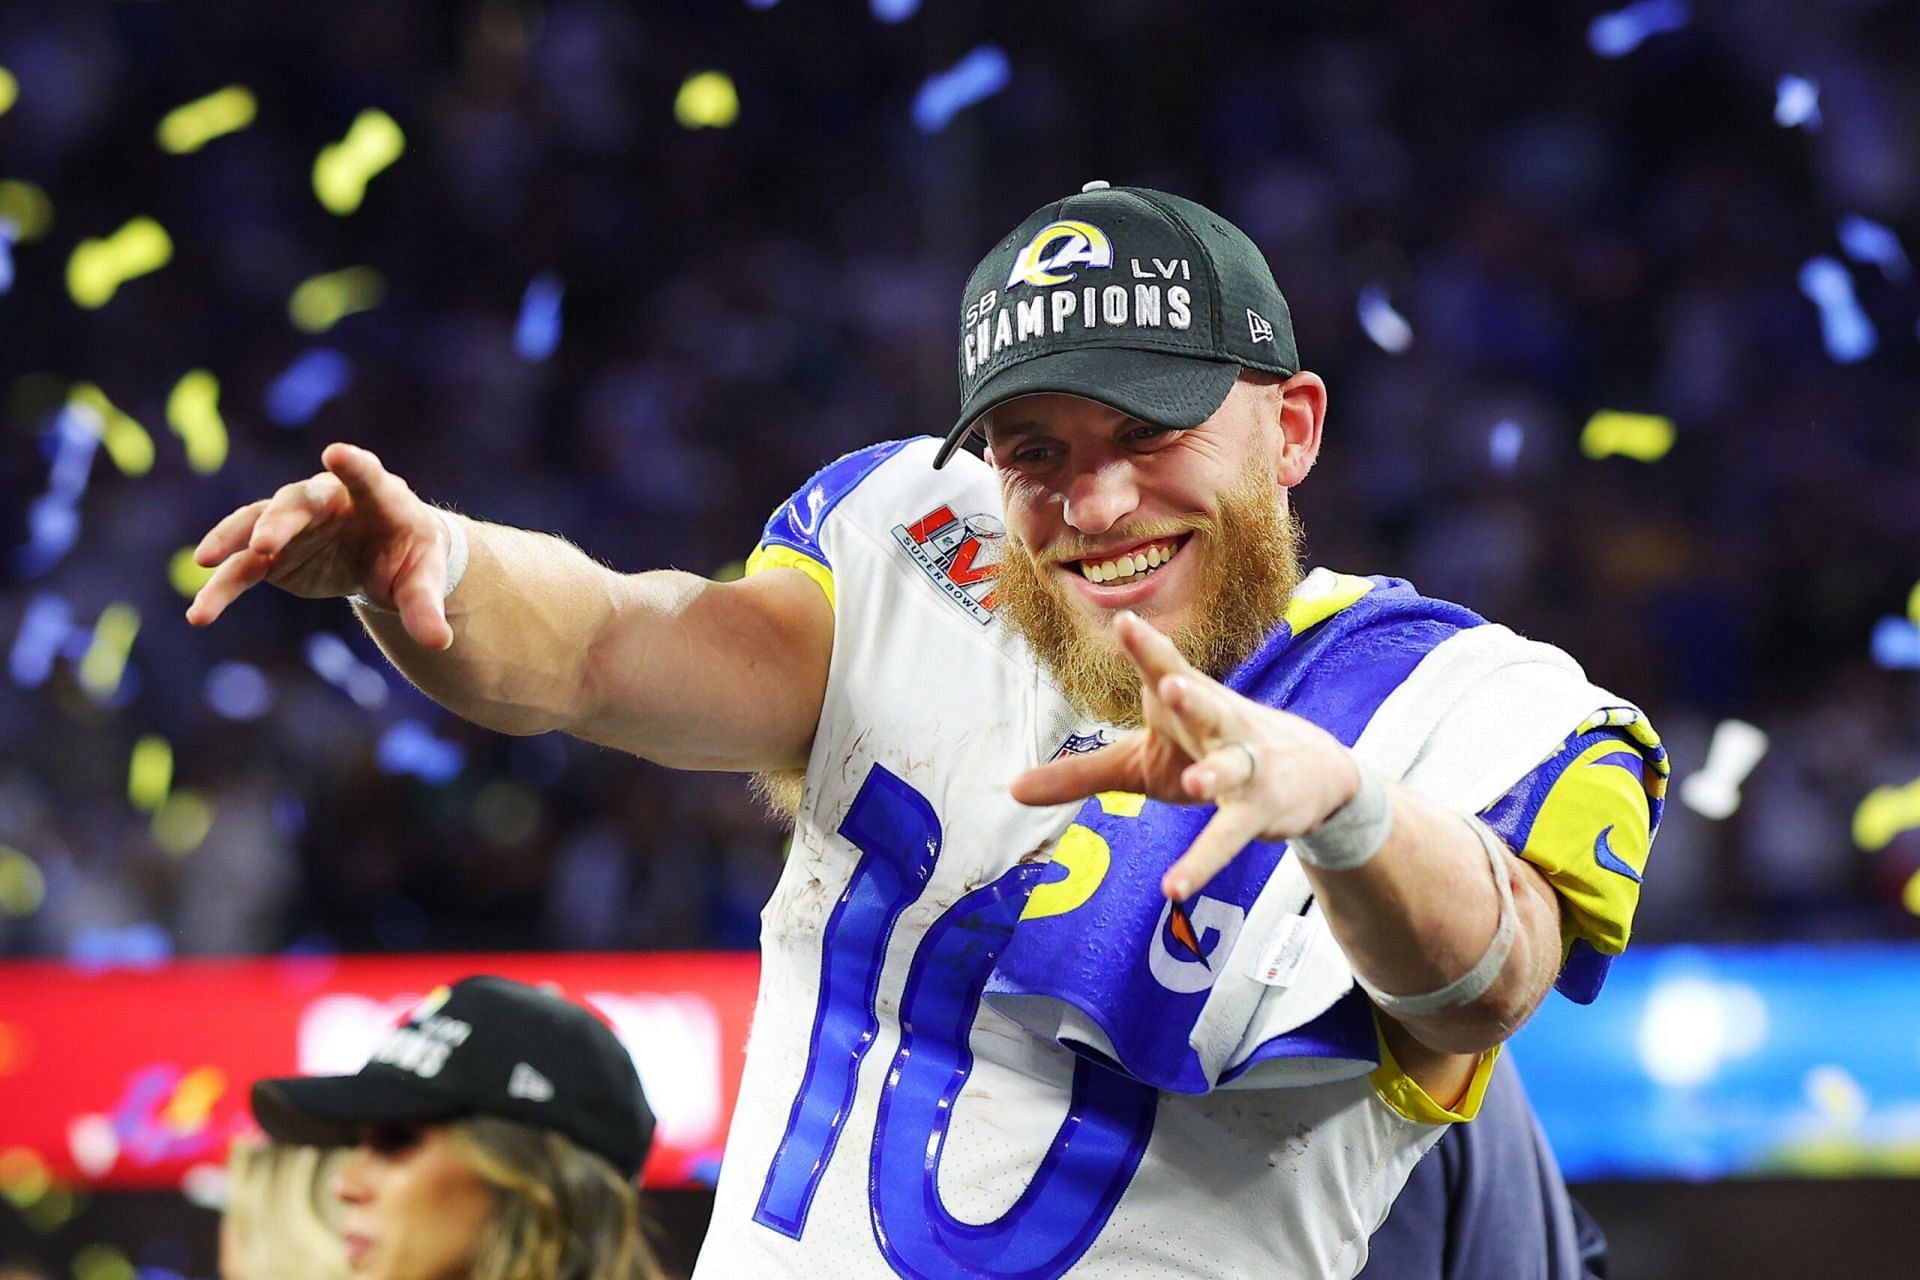 Like Aaron Donald and Matthew Stafford before him, Super Bowl MVP Cooper Kupp could inspire LeBron James and the LA Lakers to play better. [Photo: Boston.com]